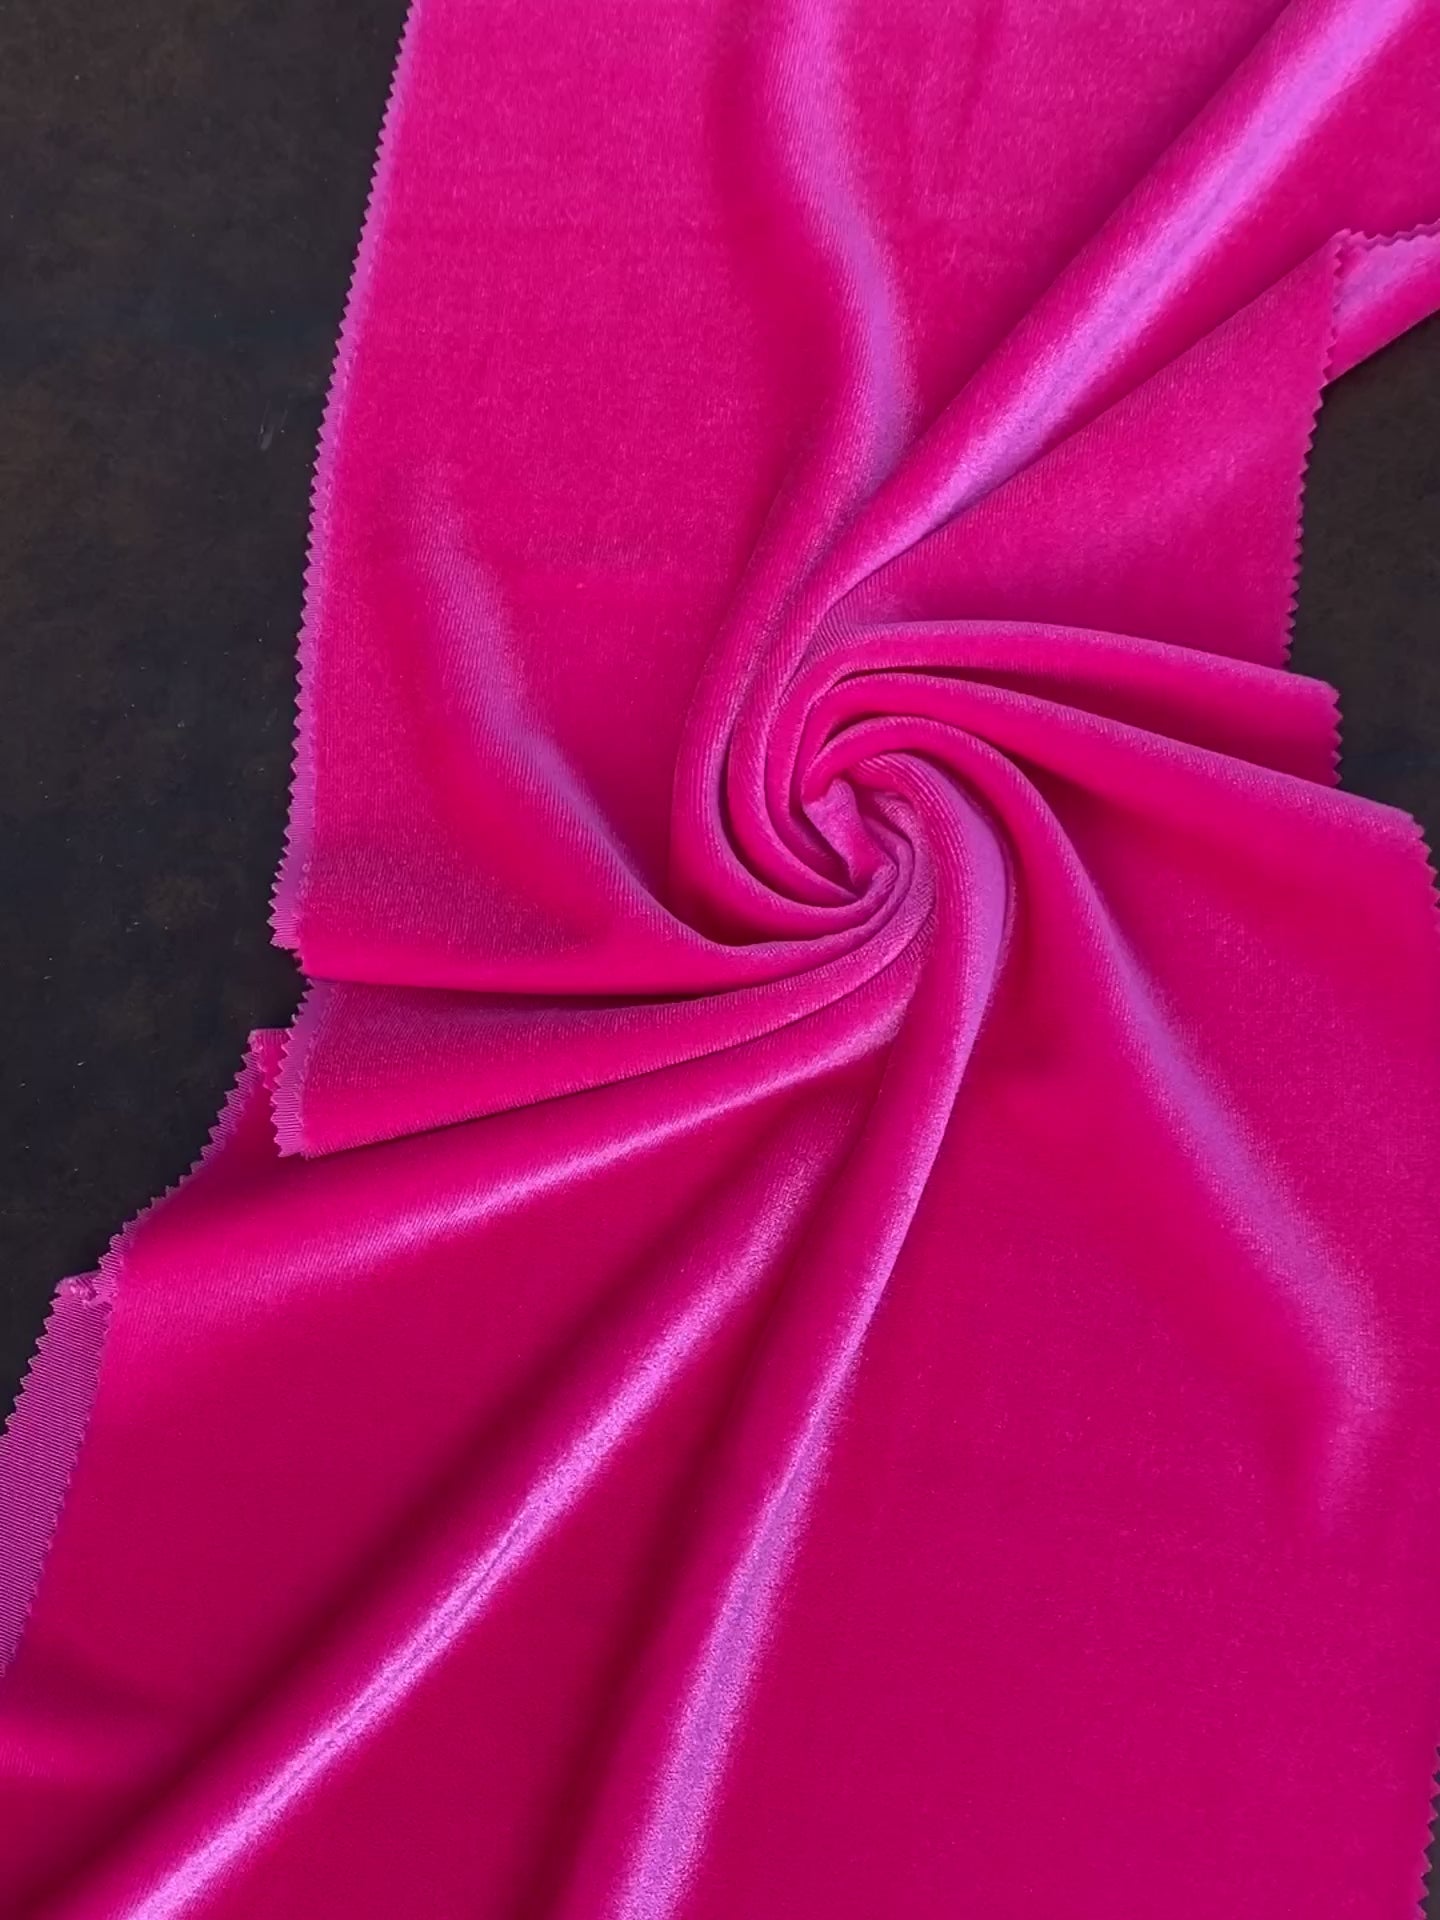 Pink Velour Fabric in Organic Cotton. Light Pink, Solid Pink, Knitted  Velour Fabric by Half Meter. 